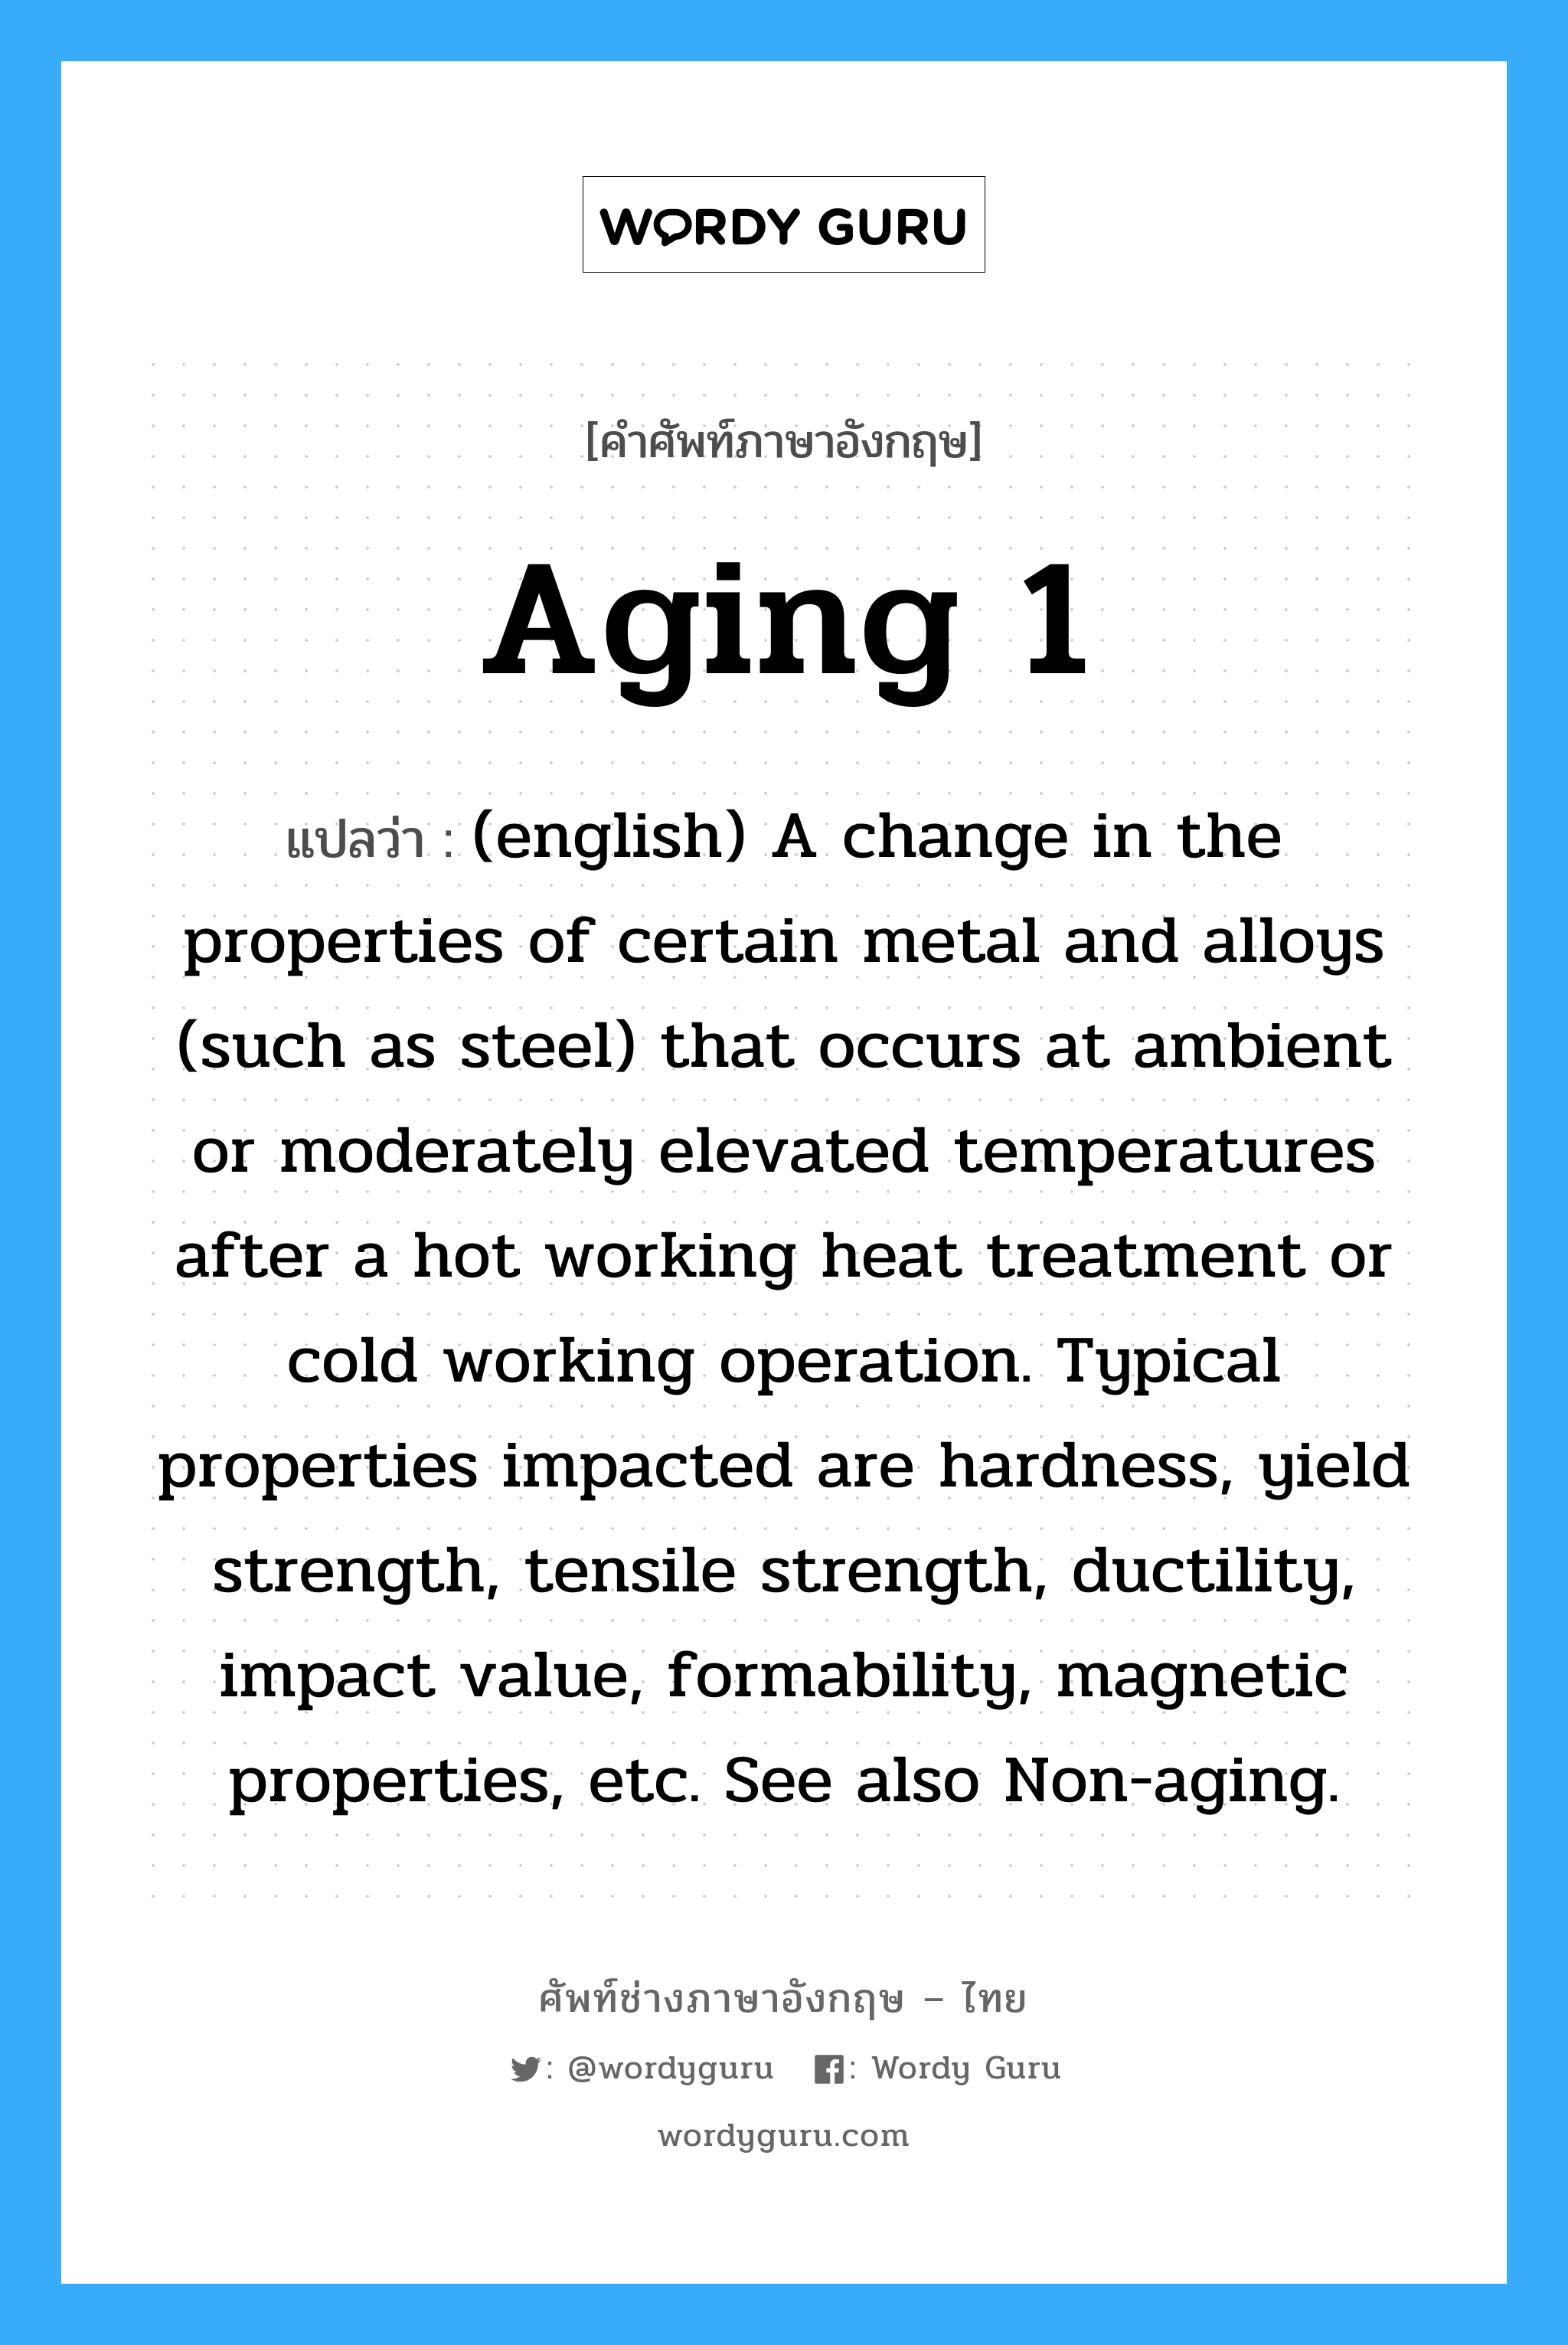 (english) A change in the properties of certain metal and alloys (such as steel) that occurs at ambient or moderately elevated temperatures after a hot working heat treatment or cold working operation. Typical properties impacted are hardness, yield strength, tensile strength, ductility, impact value, formability, magnetic properties, etc. See also Non-aging. ภาษาอังกฤษ?, คำศัพท์ช่างภาษาอังกฤษ - ไทย (english) A change in the properties of certain metal and alloys (such as steel) that occurs at ambient or moderately elevated temperatures after a hot working heat treatment or cold working operation. Typical properties impacted are hardness, yield strength, tensile strength, ductility, impact value, formability, magnetic properties, etc. See also Non-aging. คำศัพท์ภาษาอังกฤษ (english) A change in the properties of certain metal and alloys (such as steel) that occurs at ambient or moderately elevated temperatures after a hot working heat treatment or cold working operation. Typical properties impacted are hardness, yield strength, tensile strength, ductility, impact value, formability, magnetic properties, etc. See also Non-aging. แปลว่า Aging 1